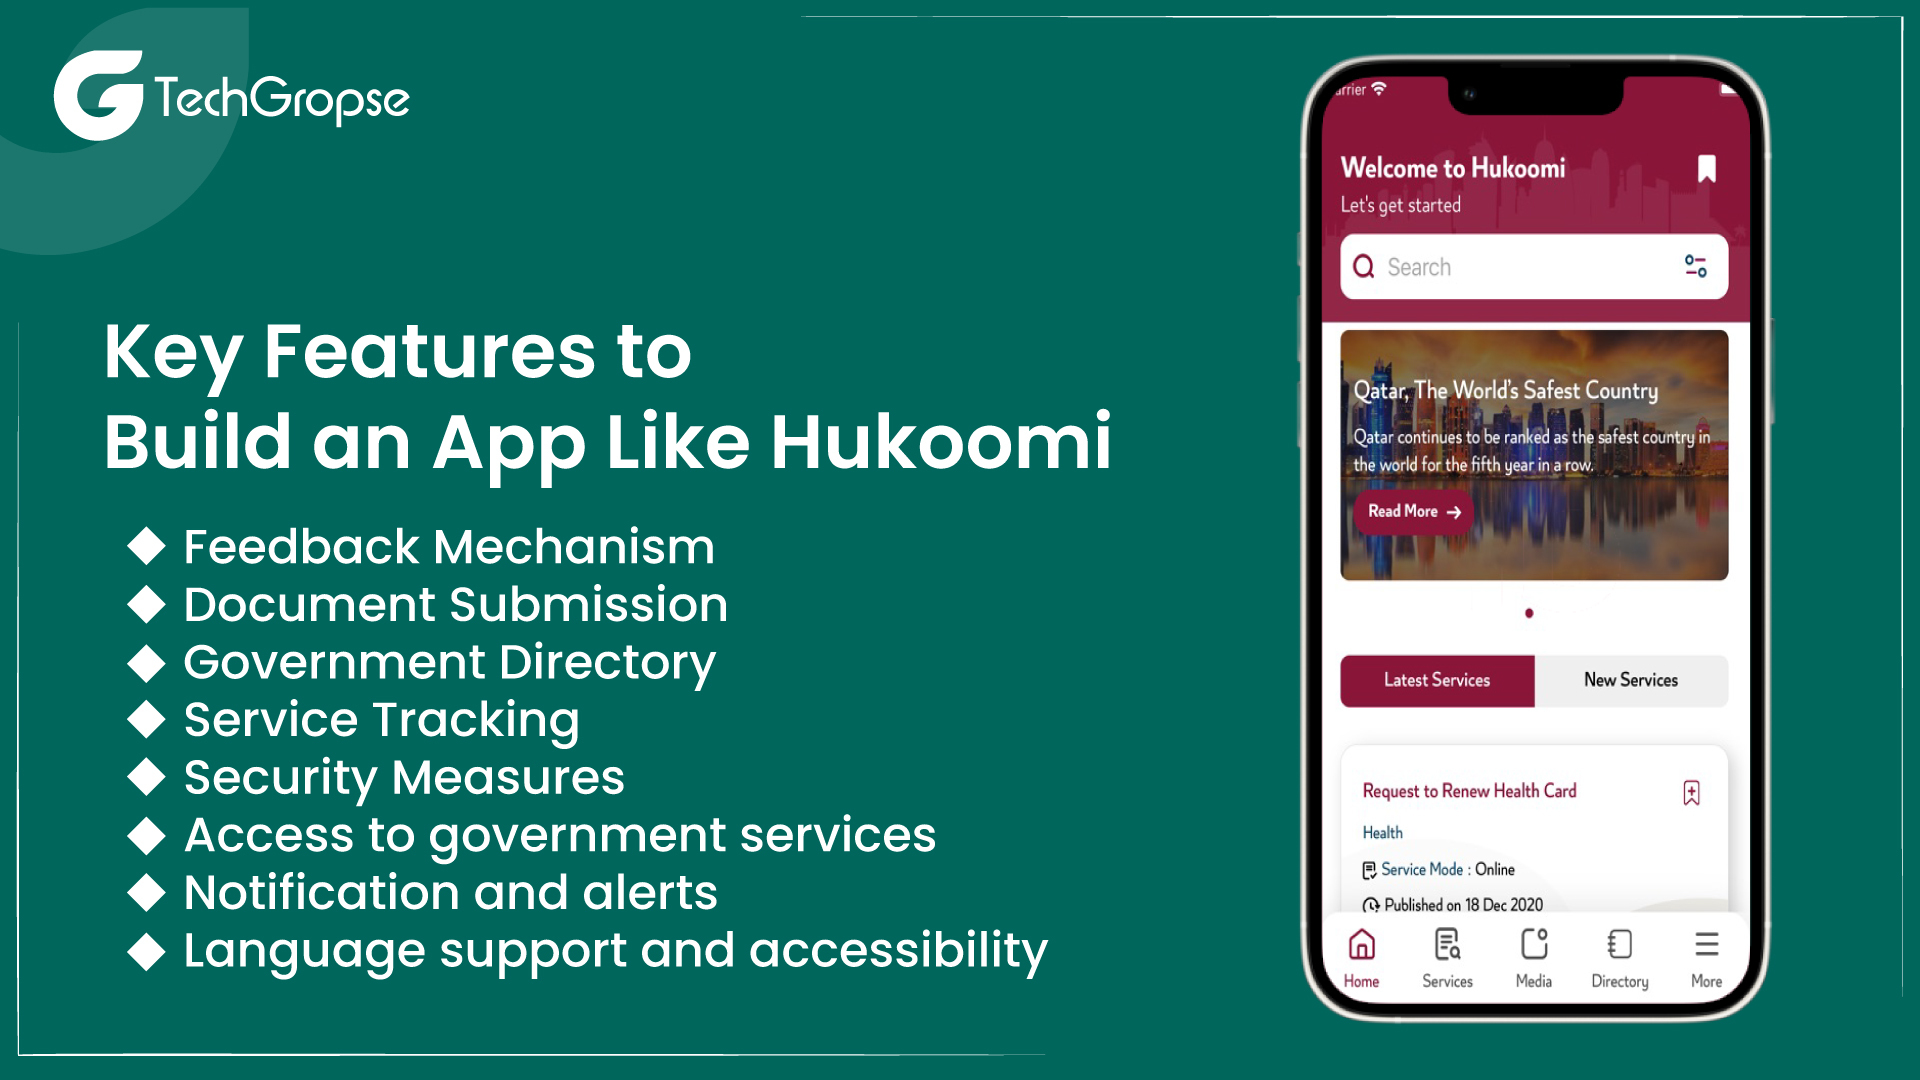 Include Key Features to Build an App Like Hukoomi